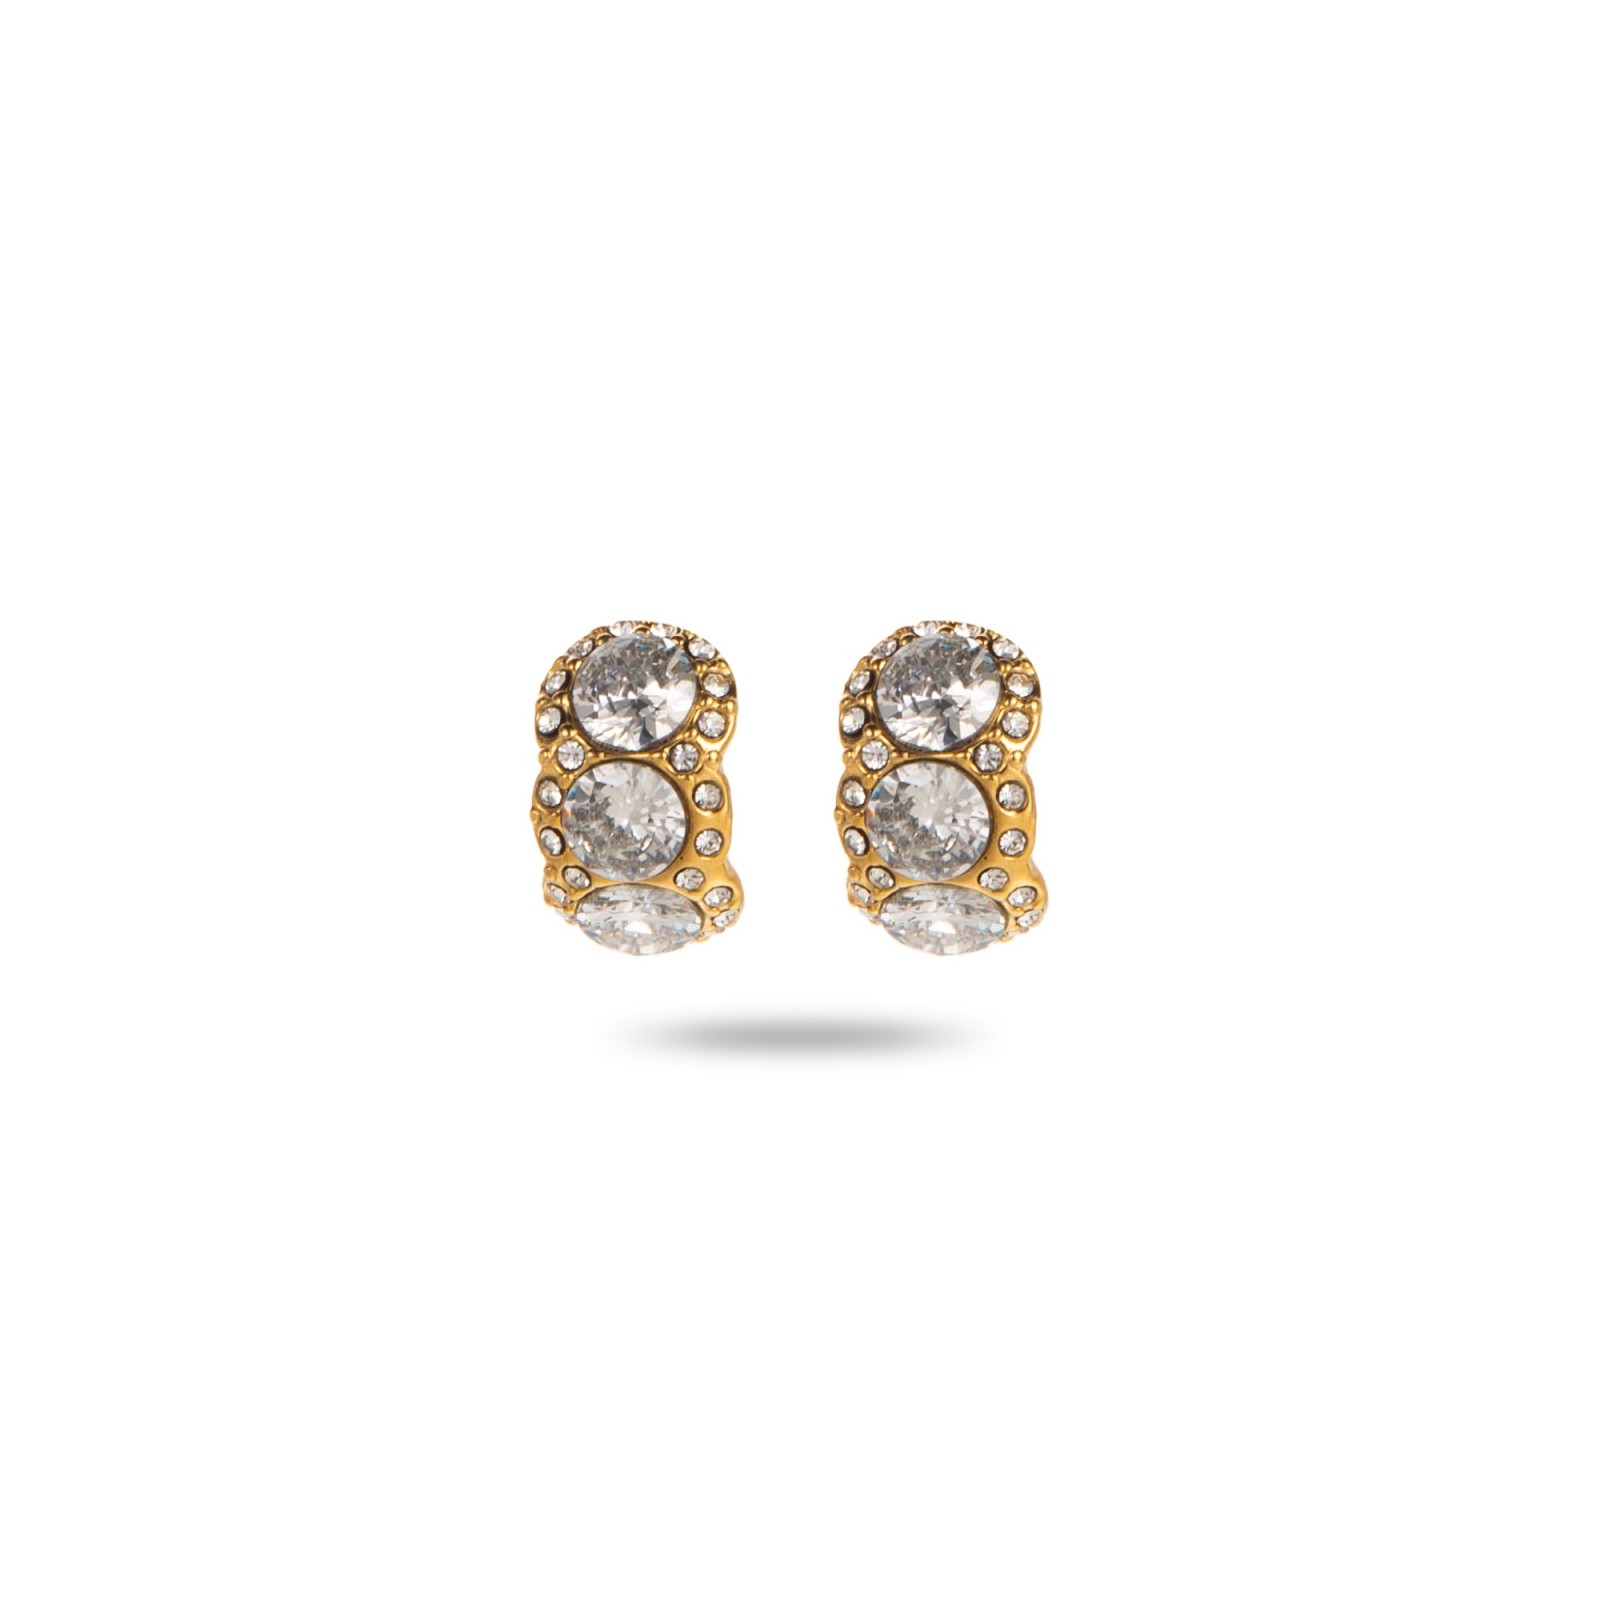 Colored Rhinestone Studs Earrings Color:White